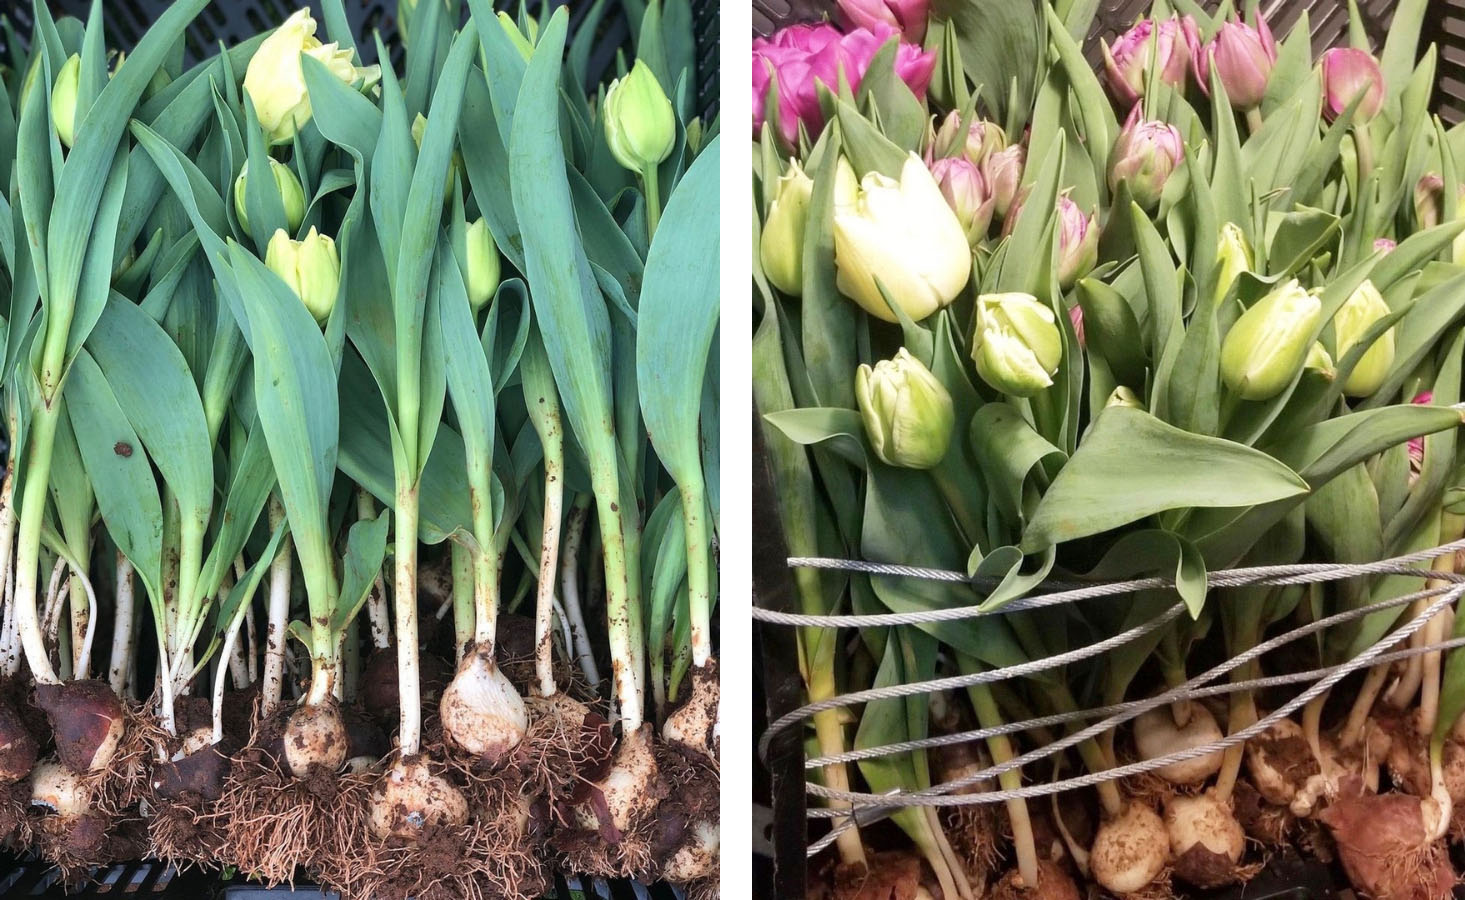 Tulip flowers harvested with bulbs attached, and stored in crates